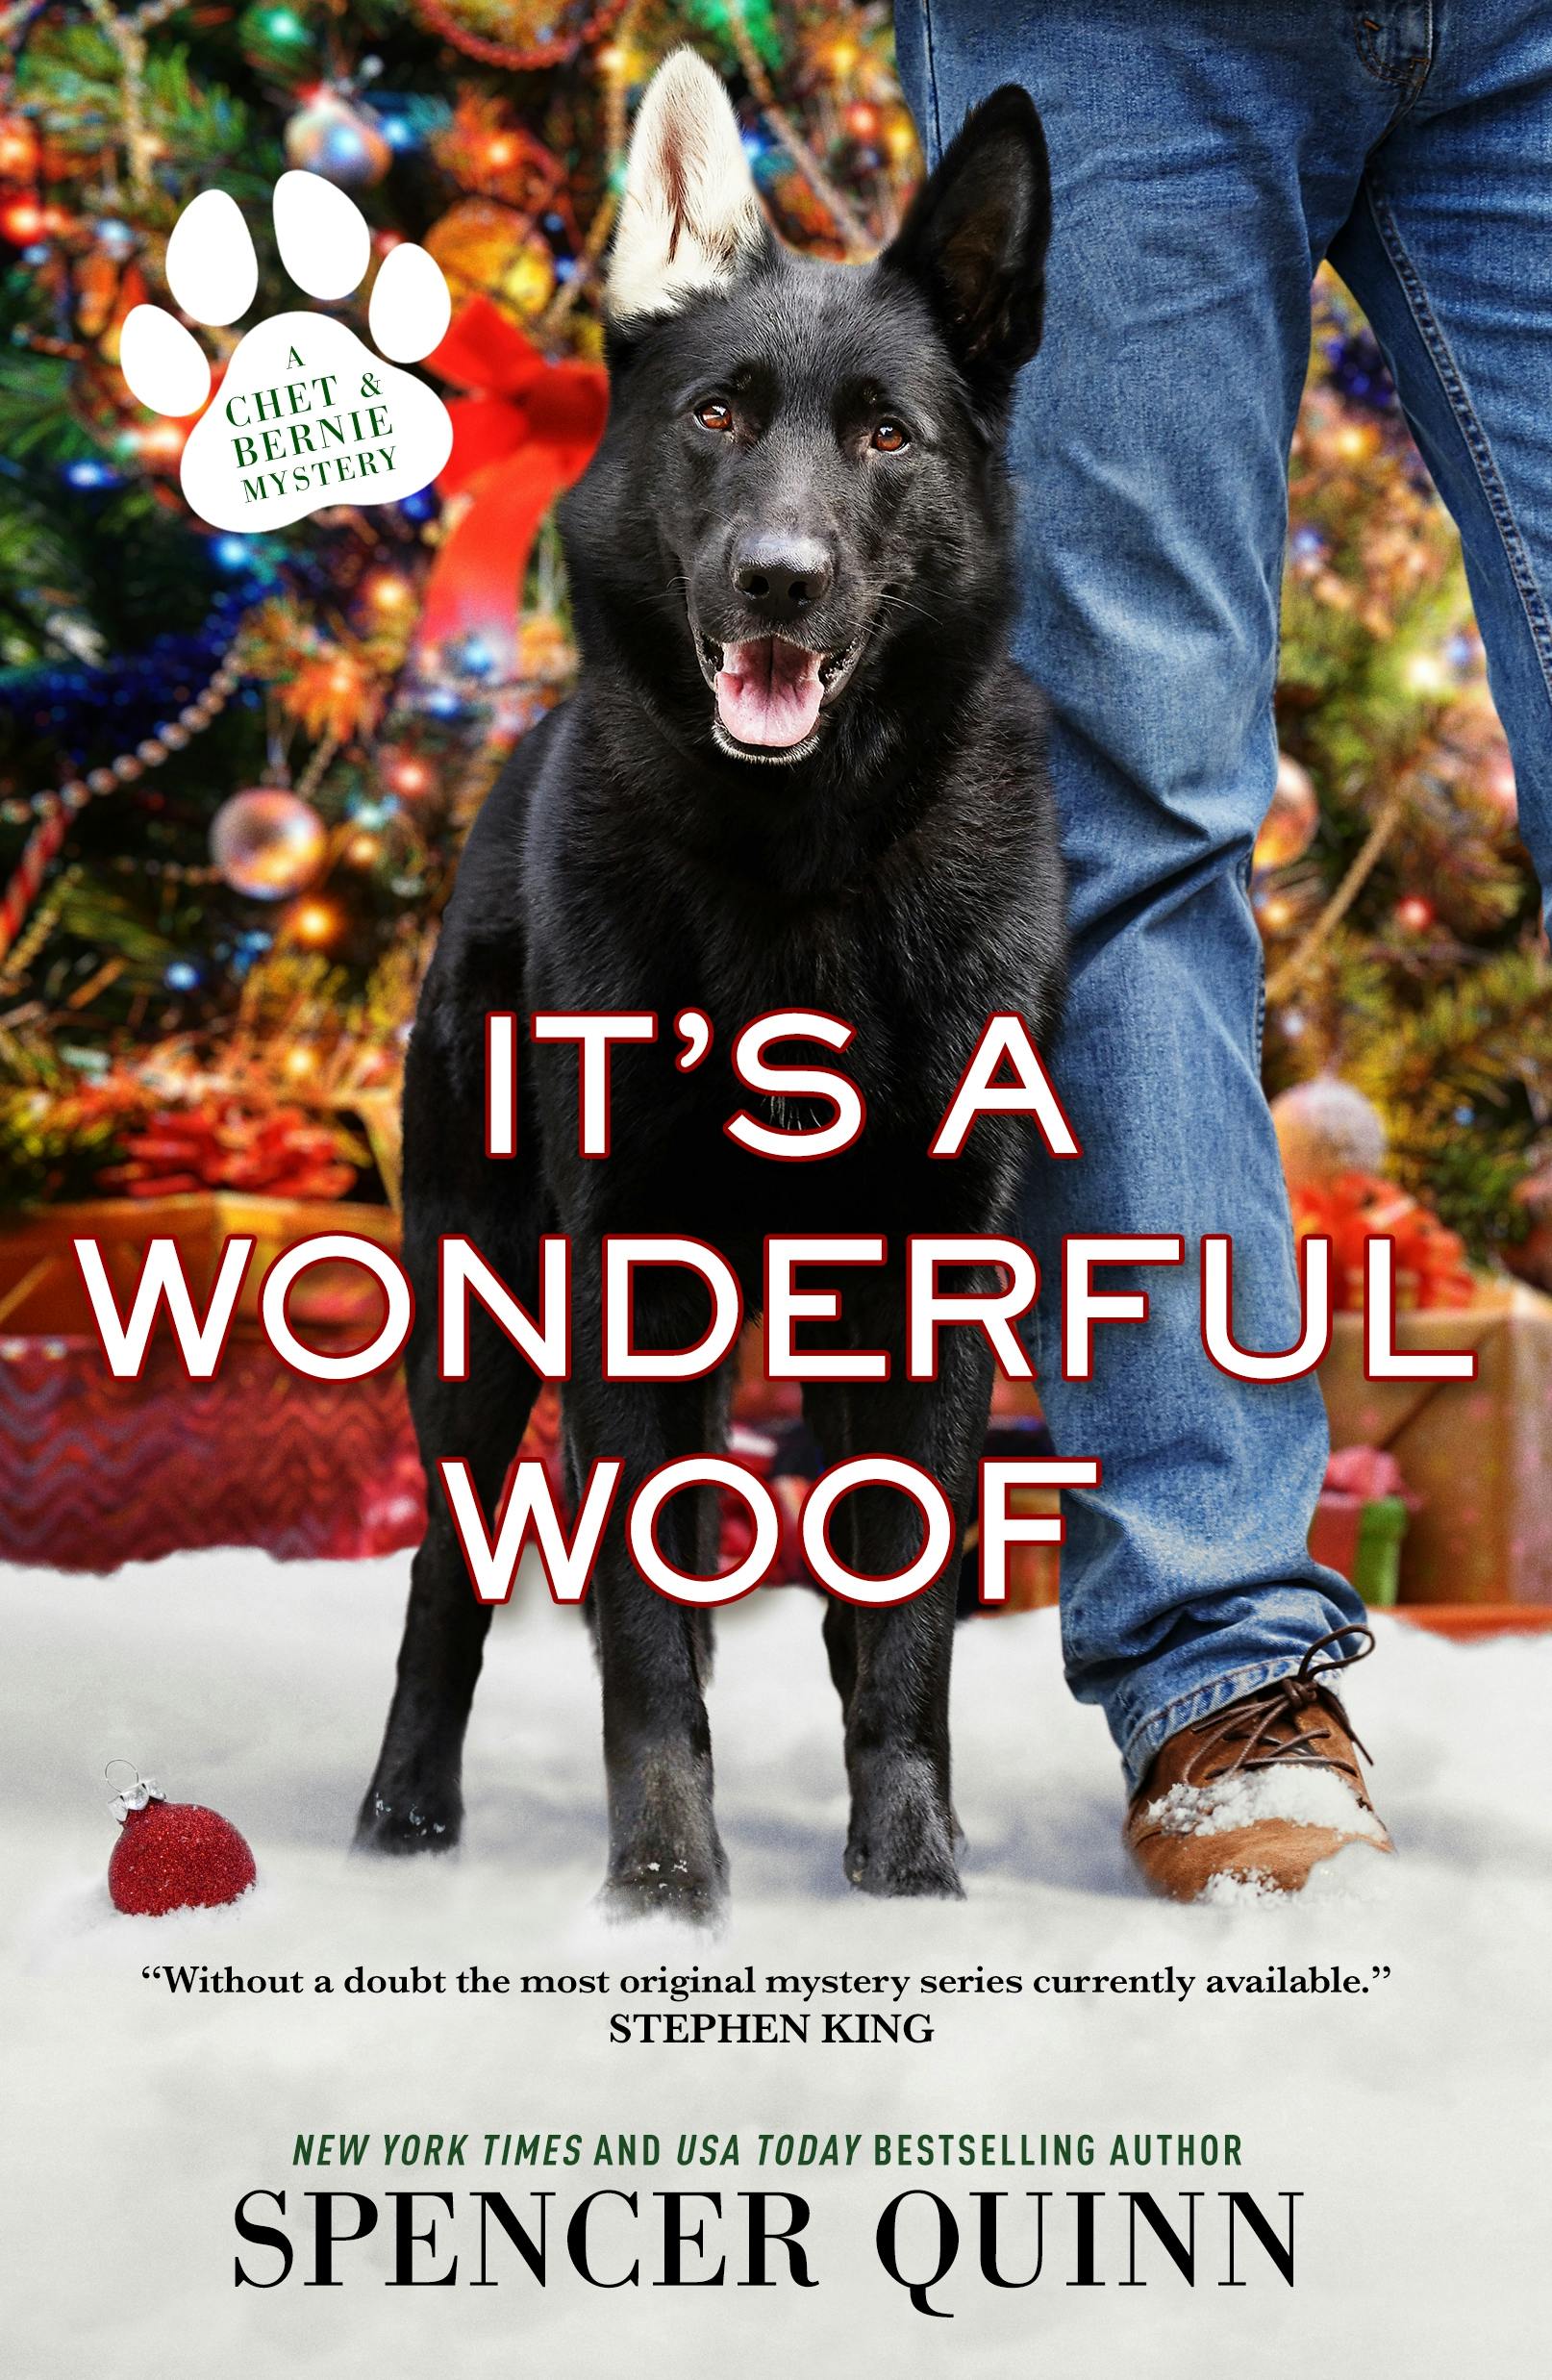 Cover for the book titled as: It's a Wonderful Woof